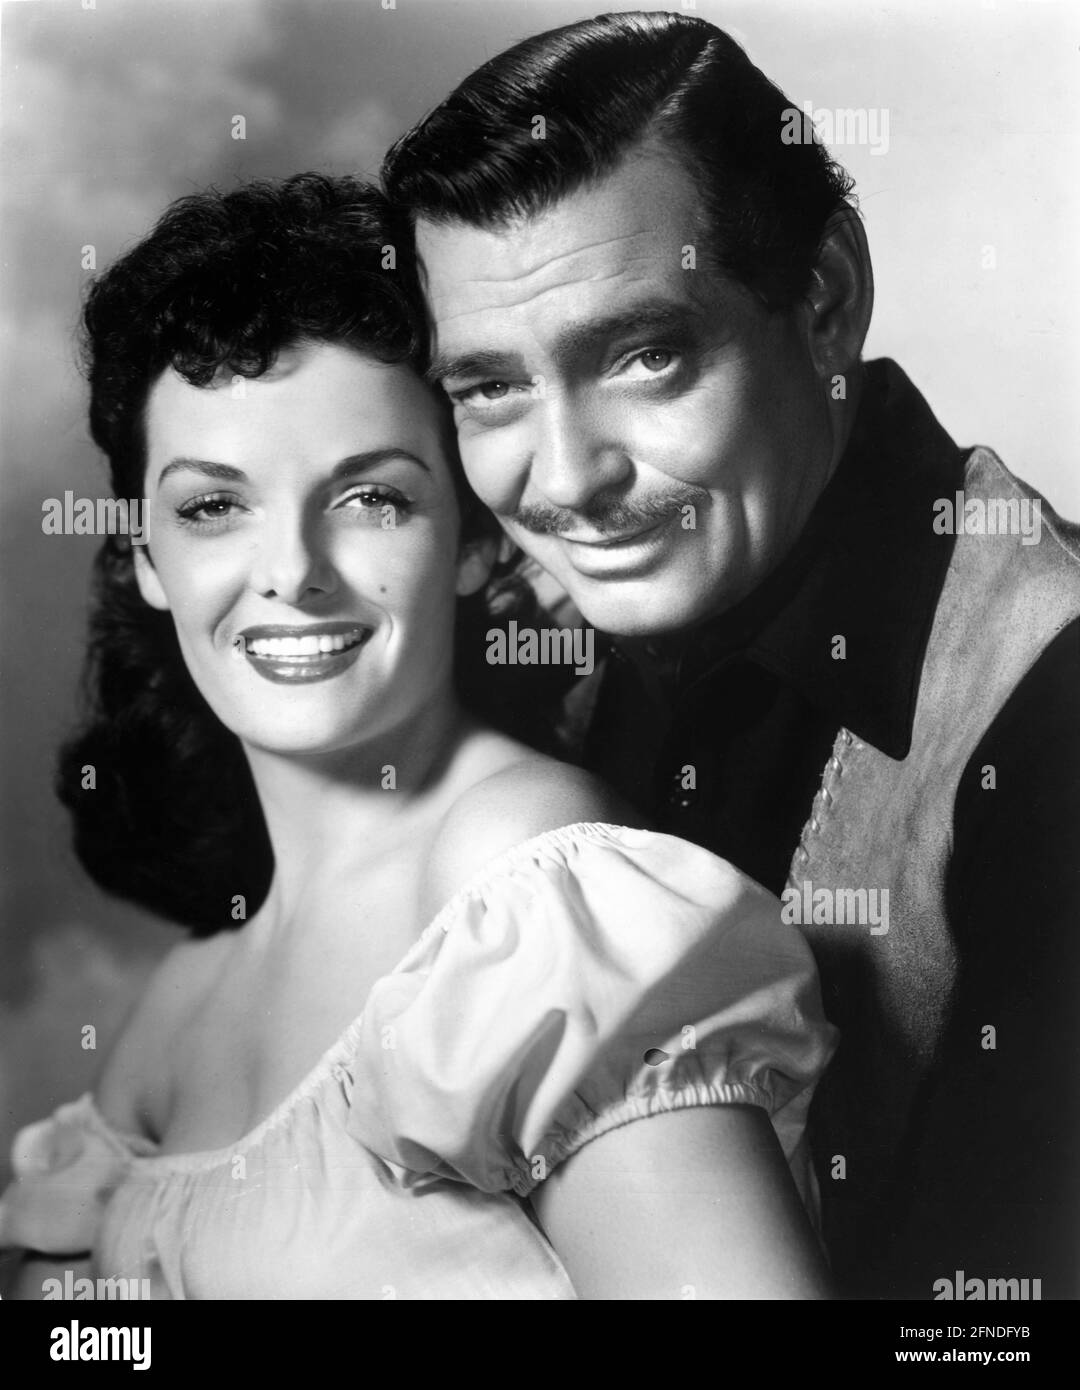 CLARK GABLE and JANE RUSSELL Publicity Portrait in THE TALL MEN 1955 director RAOUL WALSH from the novel by Heck Allen screenplay Sydney Boehm and Frank S. Nugent music Victor Young costumes Travilla Twentieth Century Fox Stock Photo